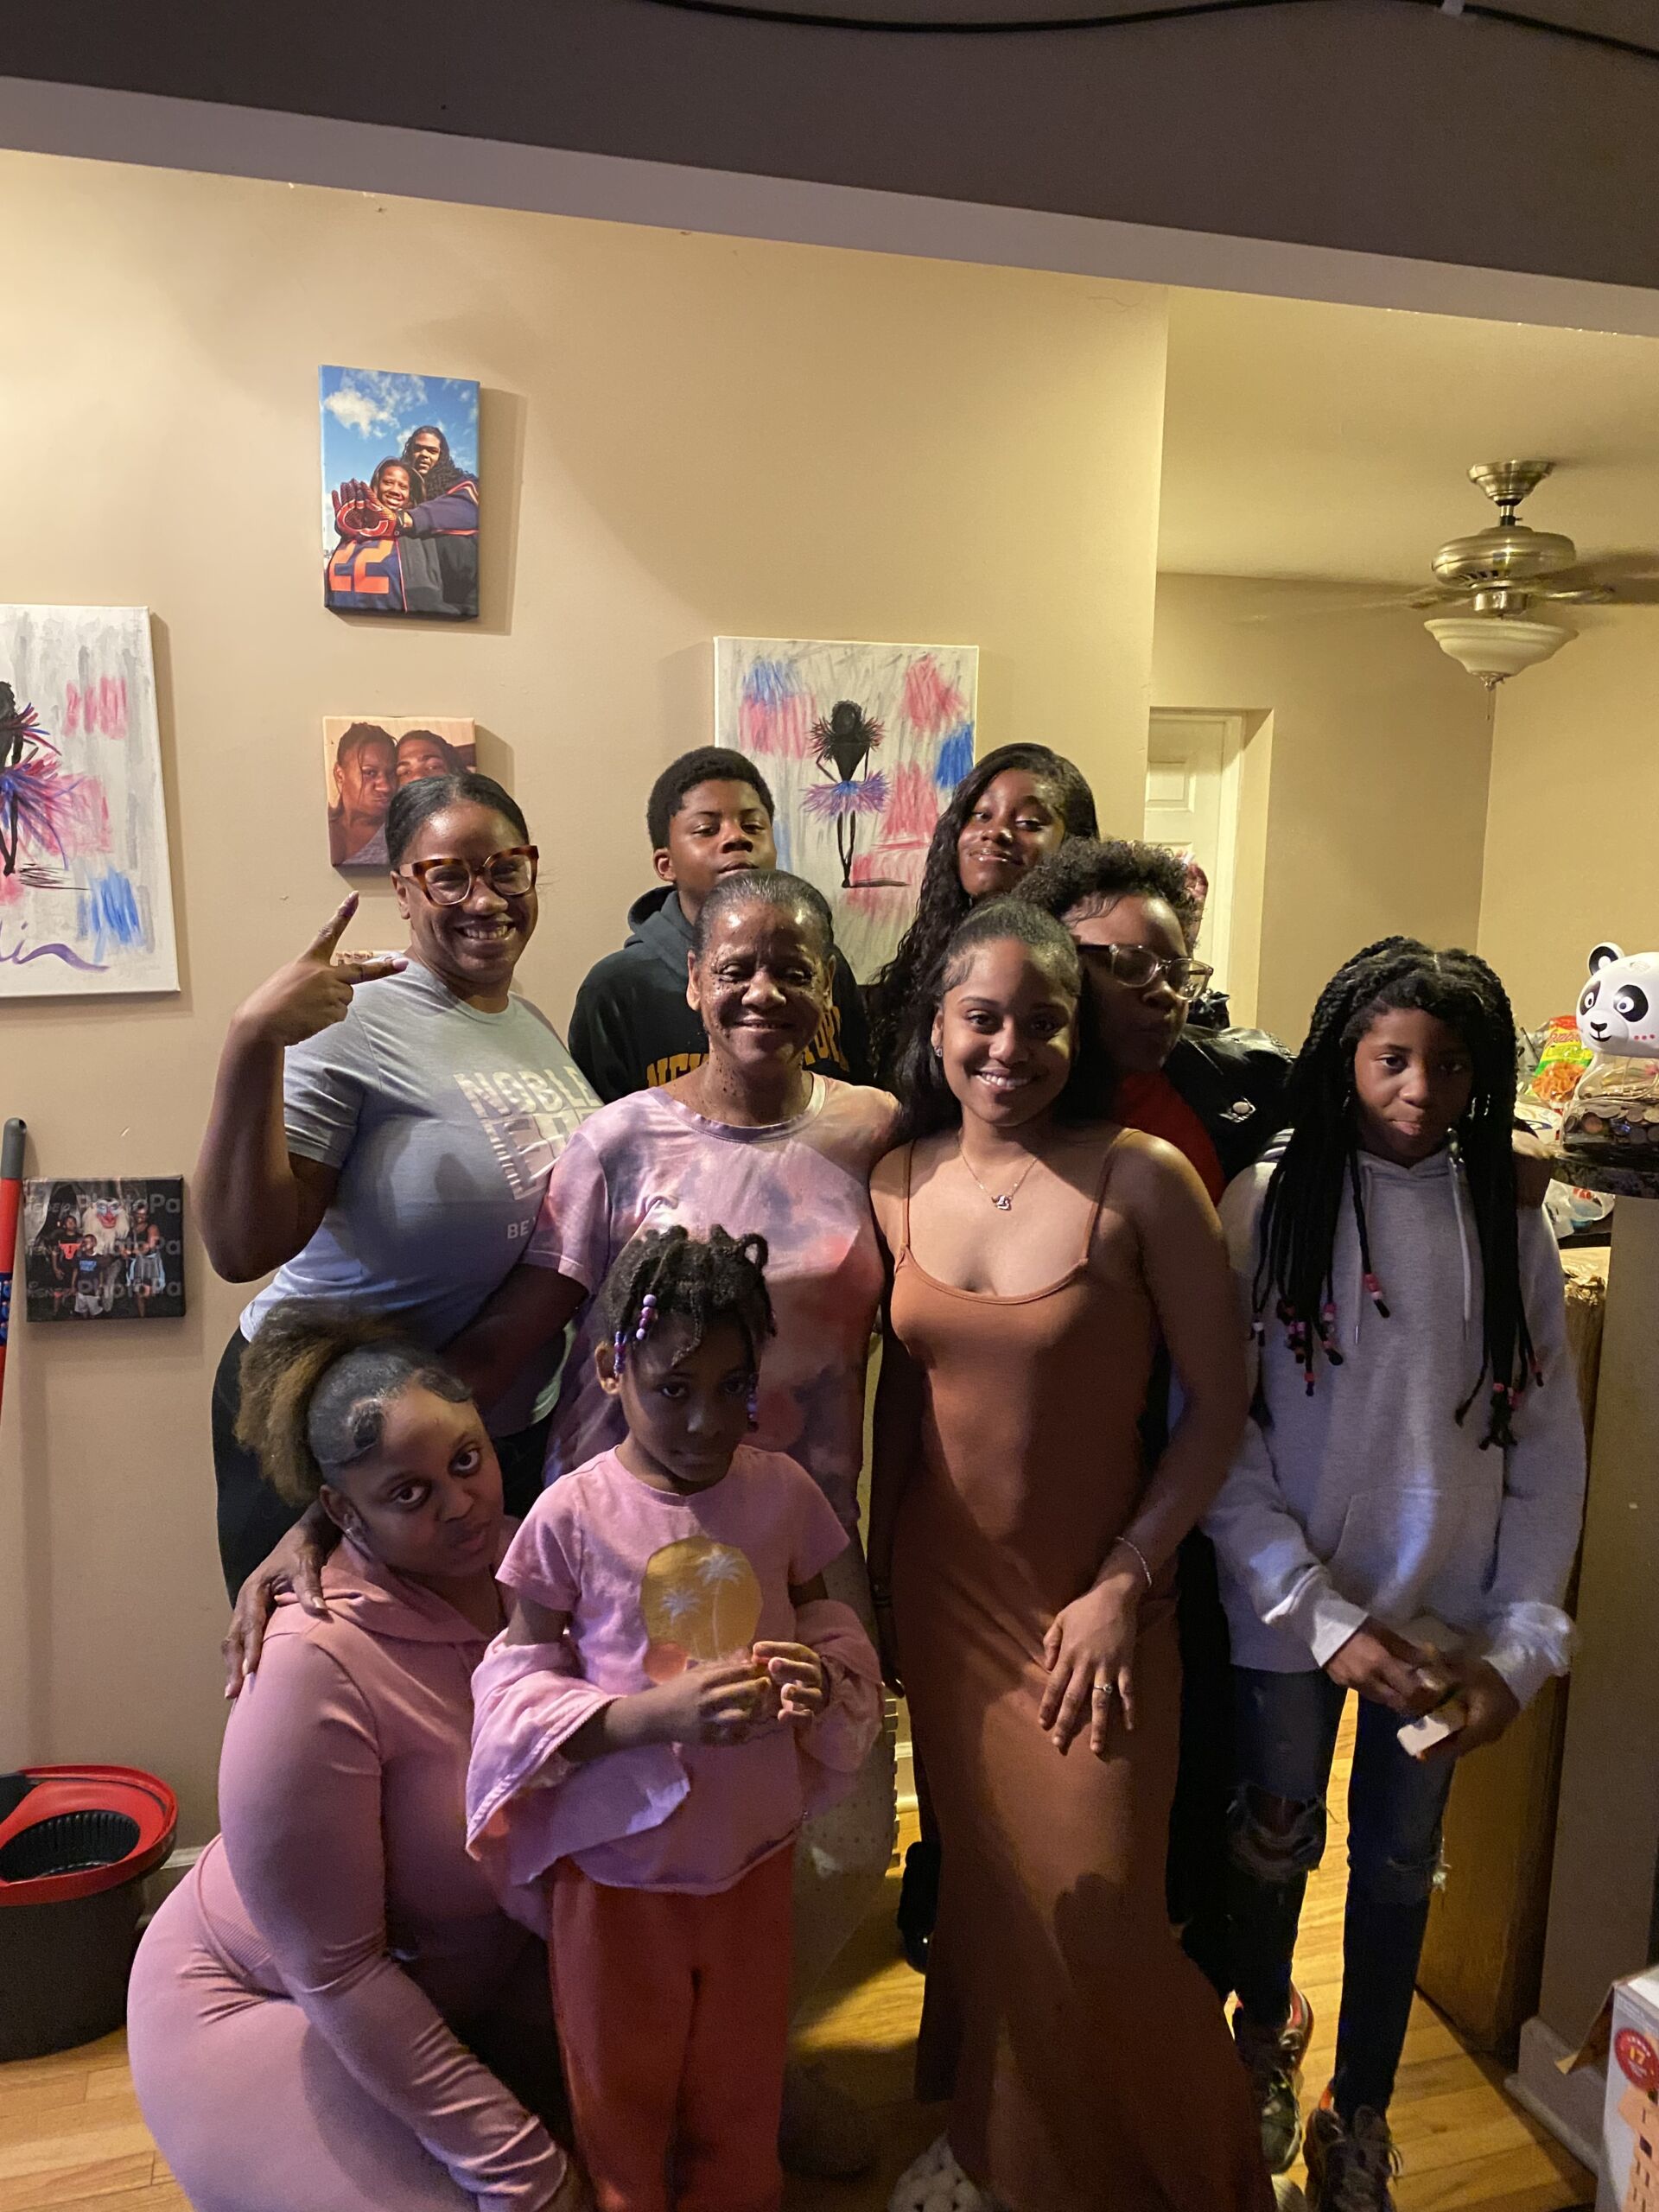 Photo shows Principal Kashawndra Wilson posing for a photo with her family at a family gathering. They are in a residental house with pieces of art and photos behind them.